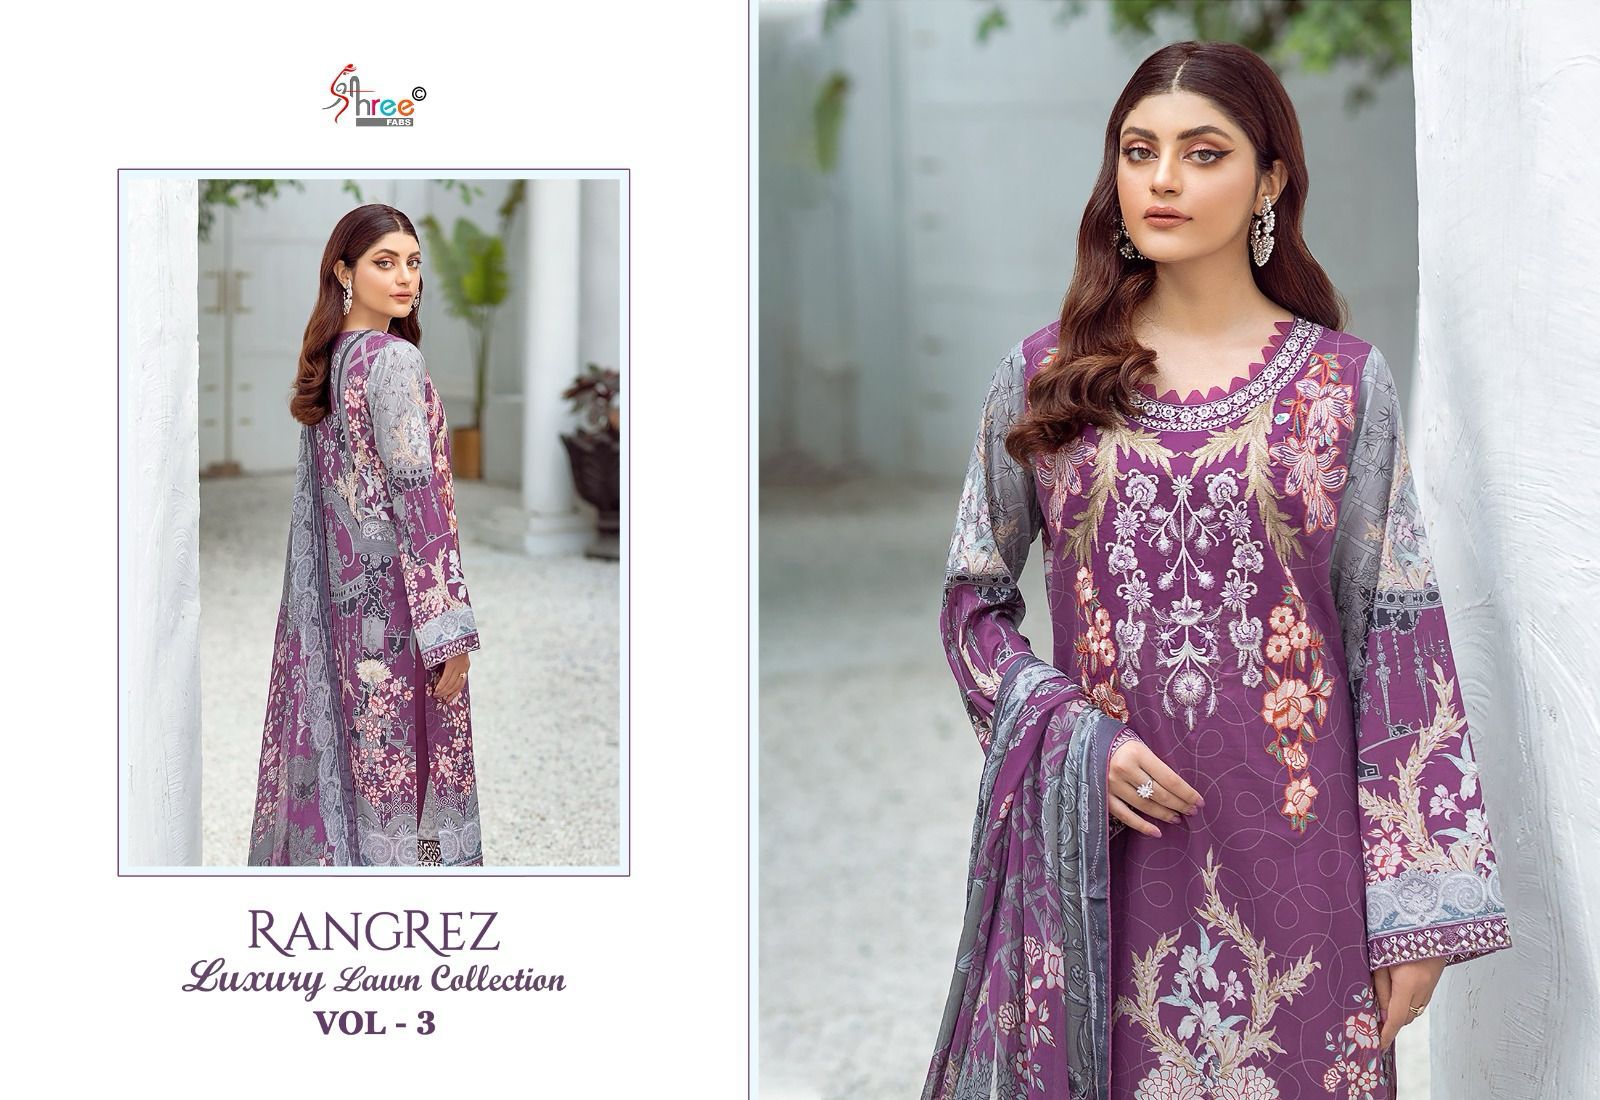 Shree Rangrez Luxury Lawn Collection Vol 3 collection 5